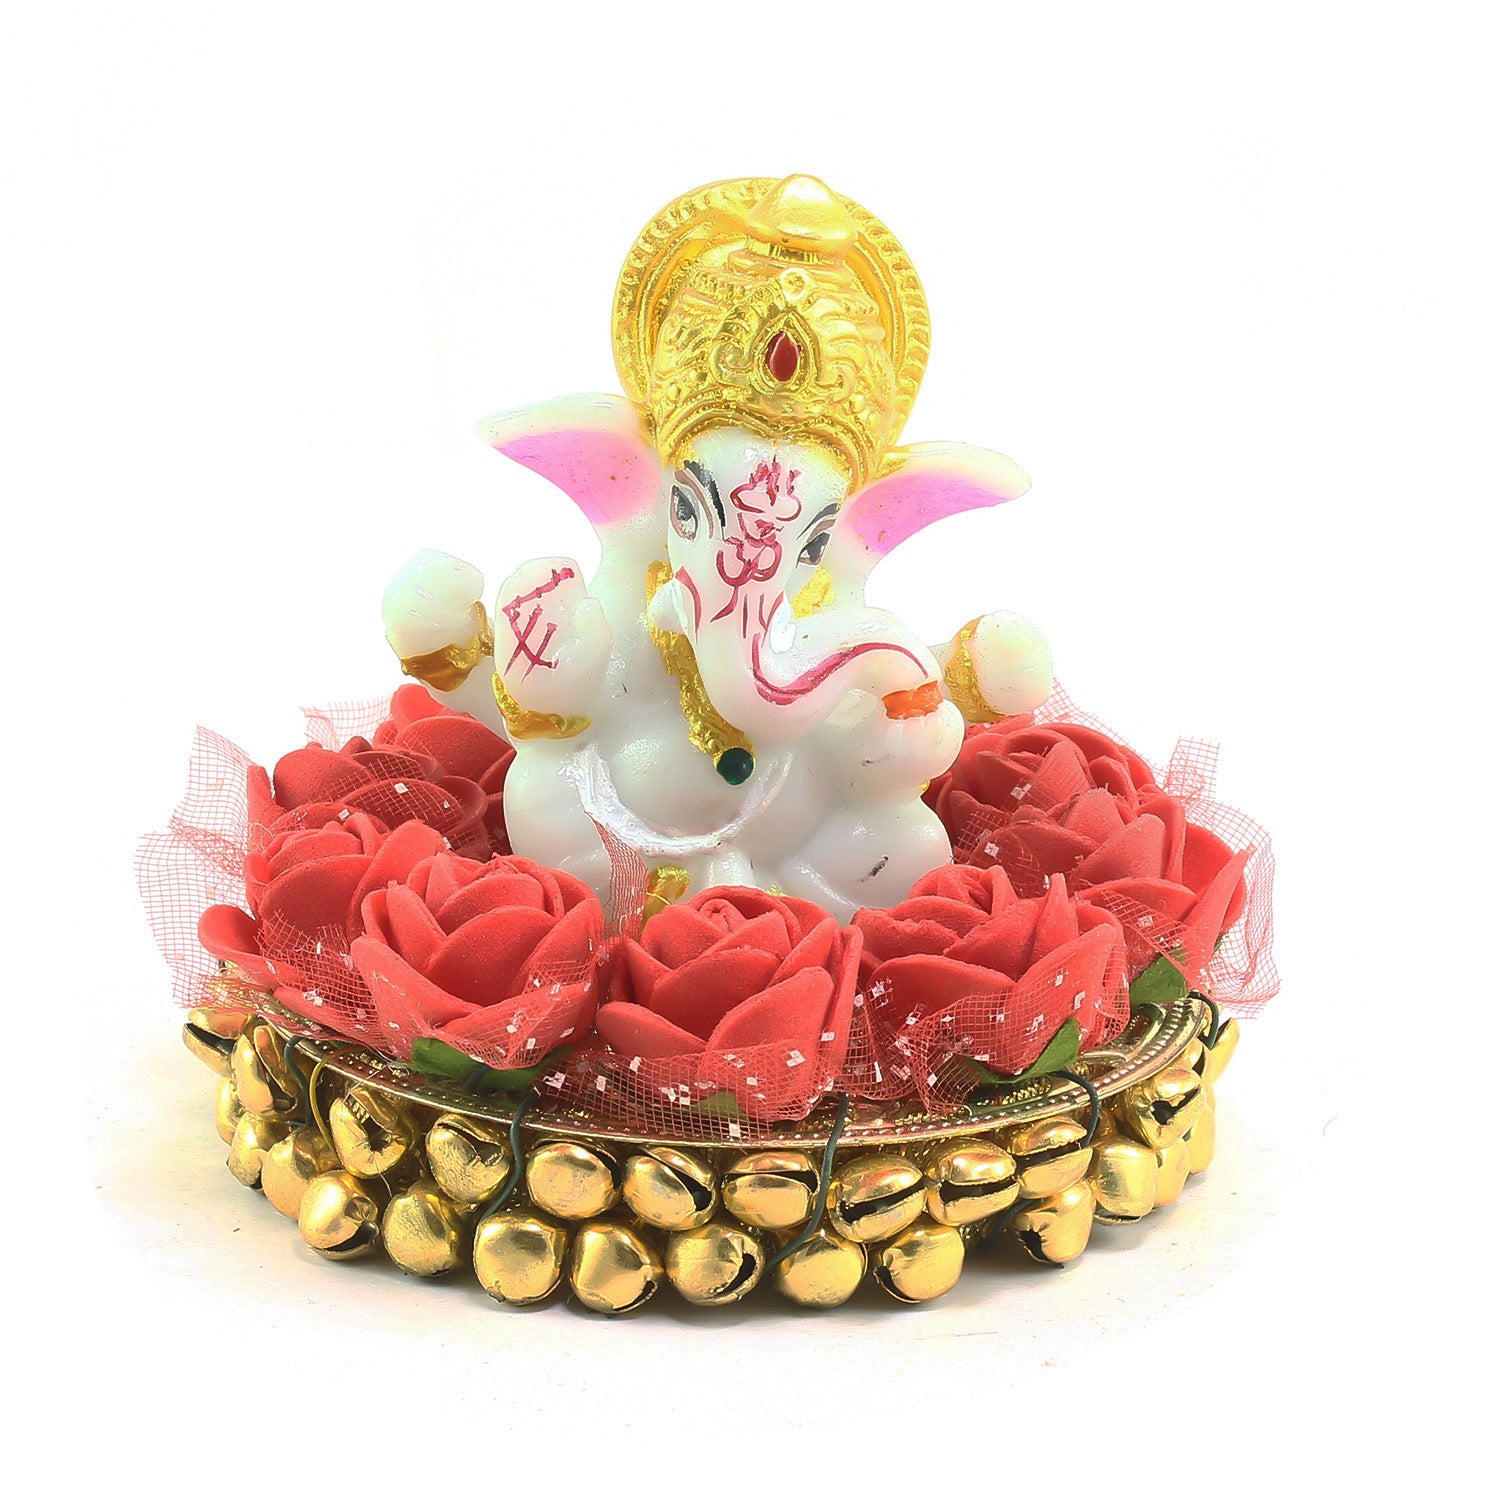 Polyresin Lord Ganesha Idol on Decorative Plate for Car Dashboard and Home 1